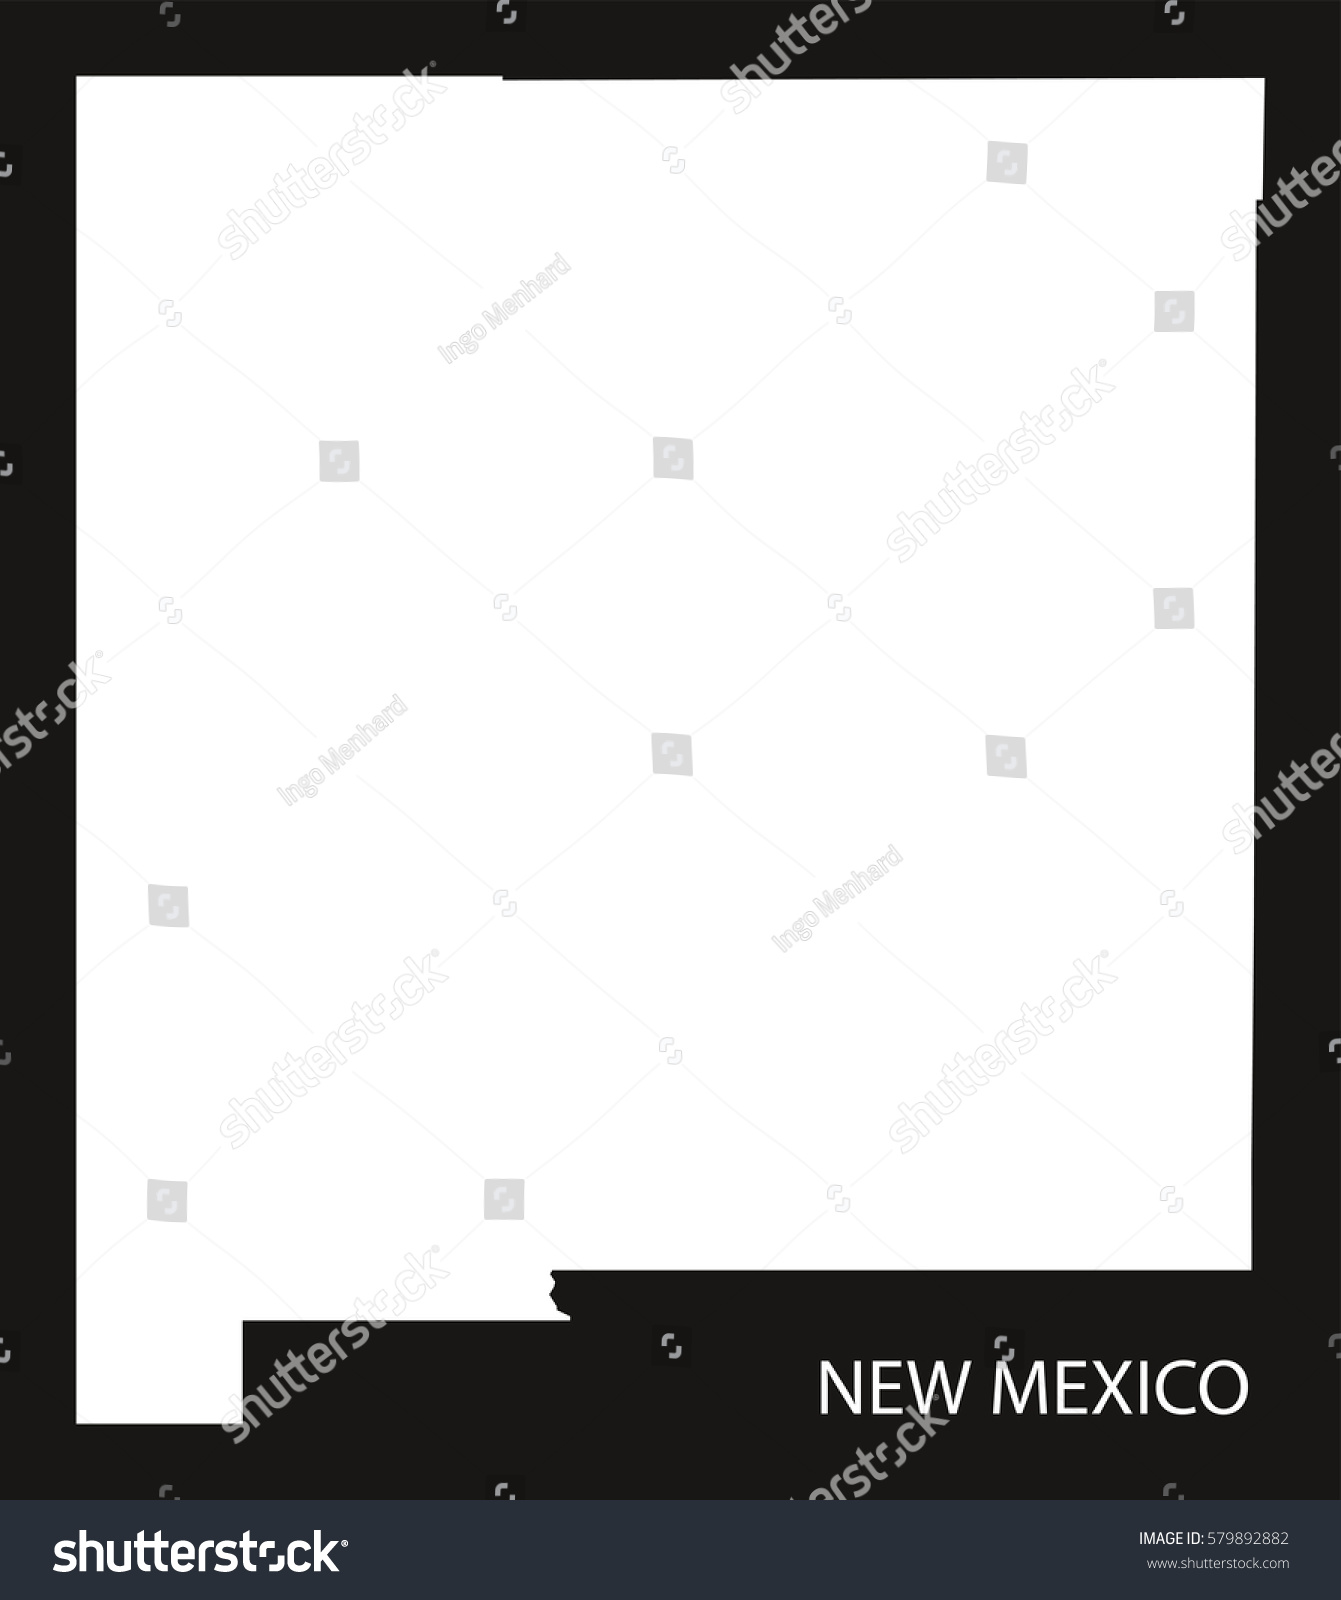 New Mexico Usa Map Black Inverted Silhouette Royalty Free Stock Vector 579892882 7170